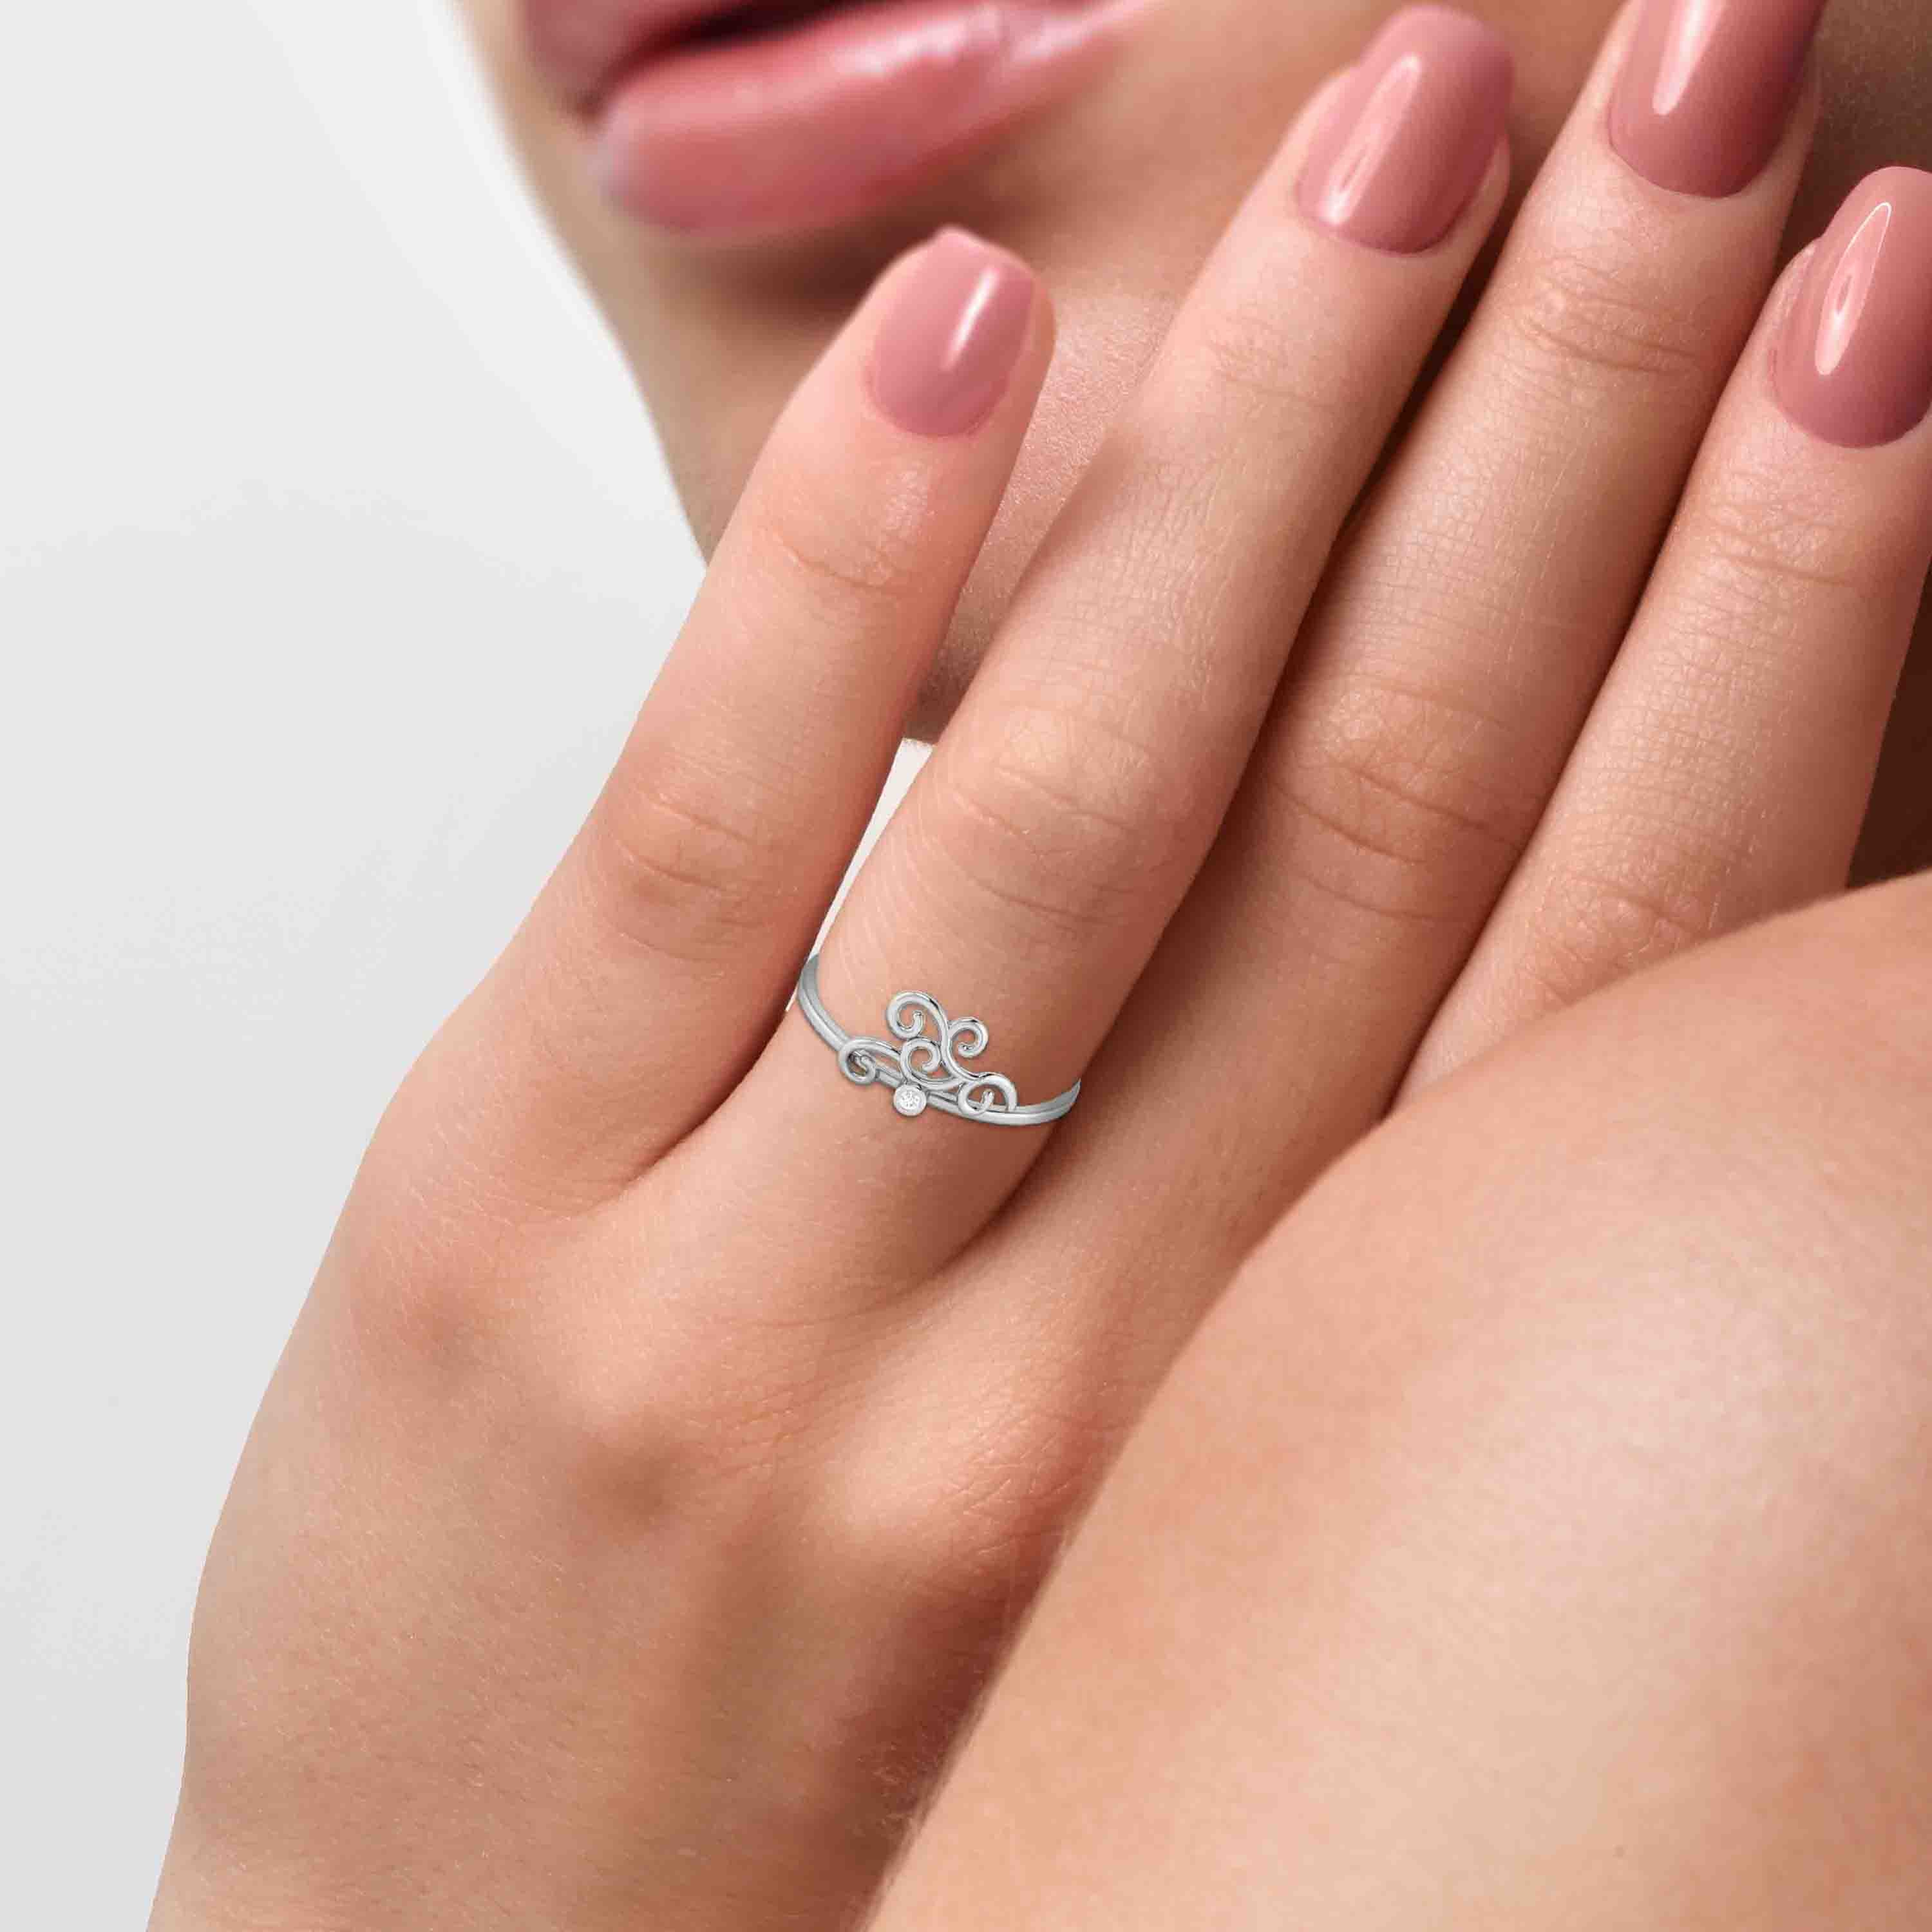 Beautiful Engagement Rings from Local Austin Jewelers